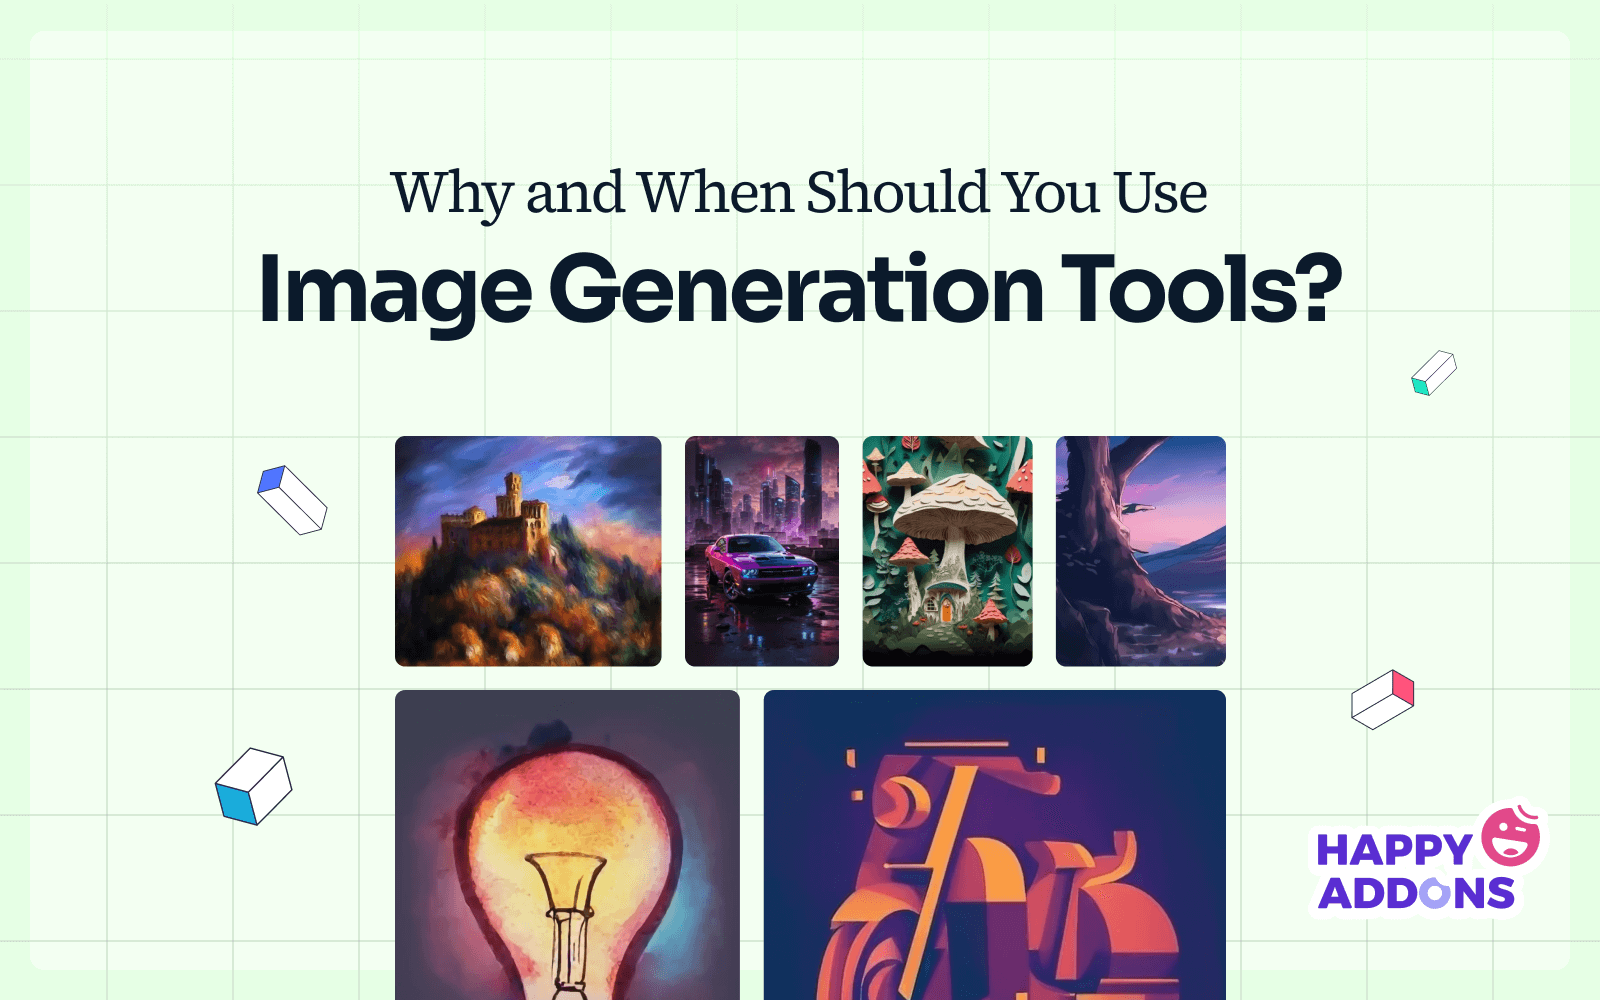 Why and when should you use AI image generation tools?